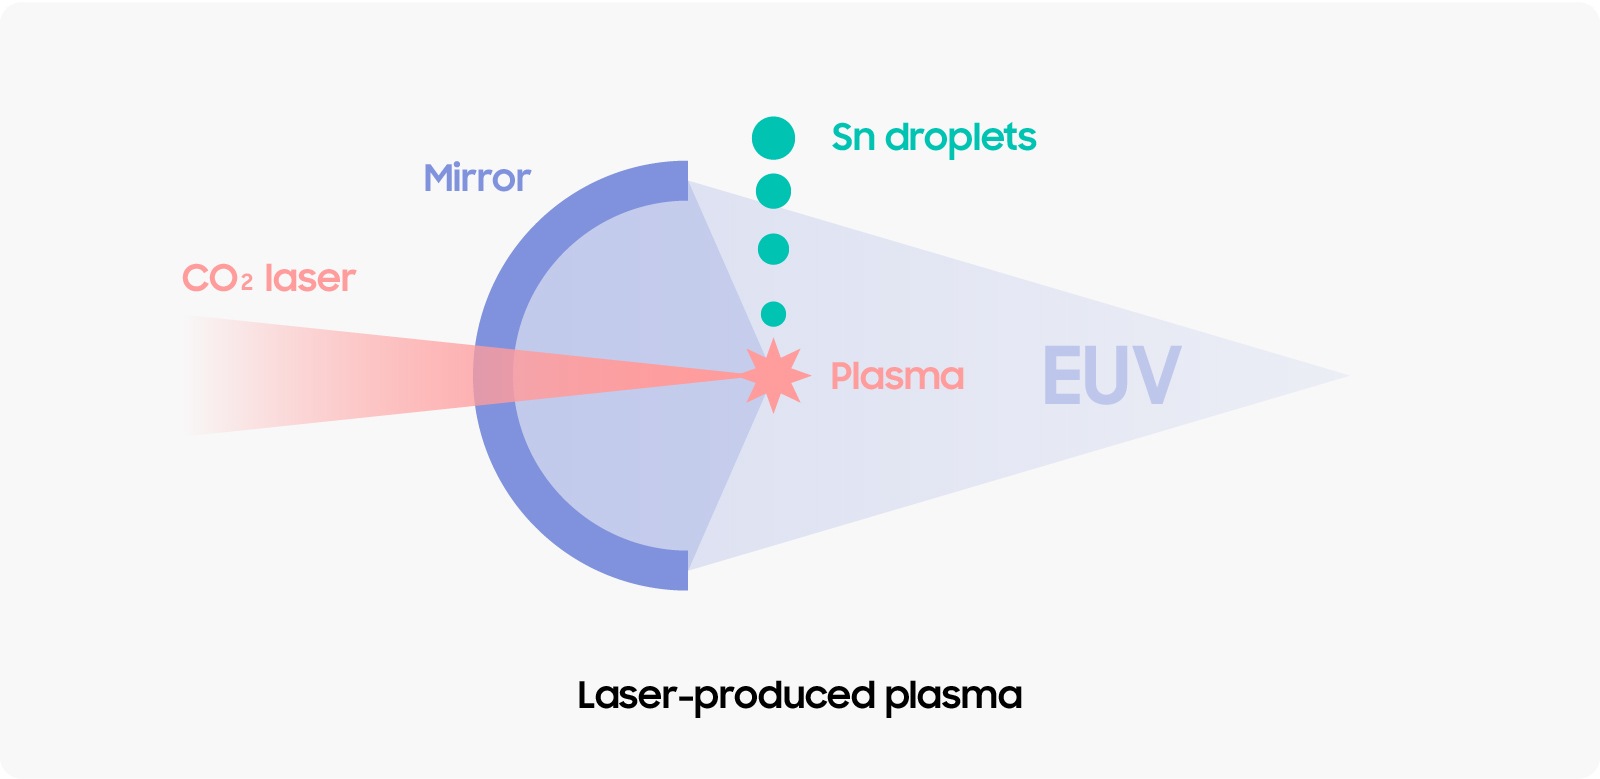 Figure [4] A CO2 is collided with molten tin (Sn) droplets to generate plasma. The light given off by this plasma is focused using mirrors, giving us EUV light.